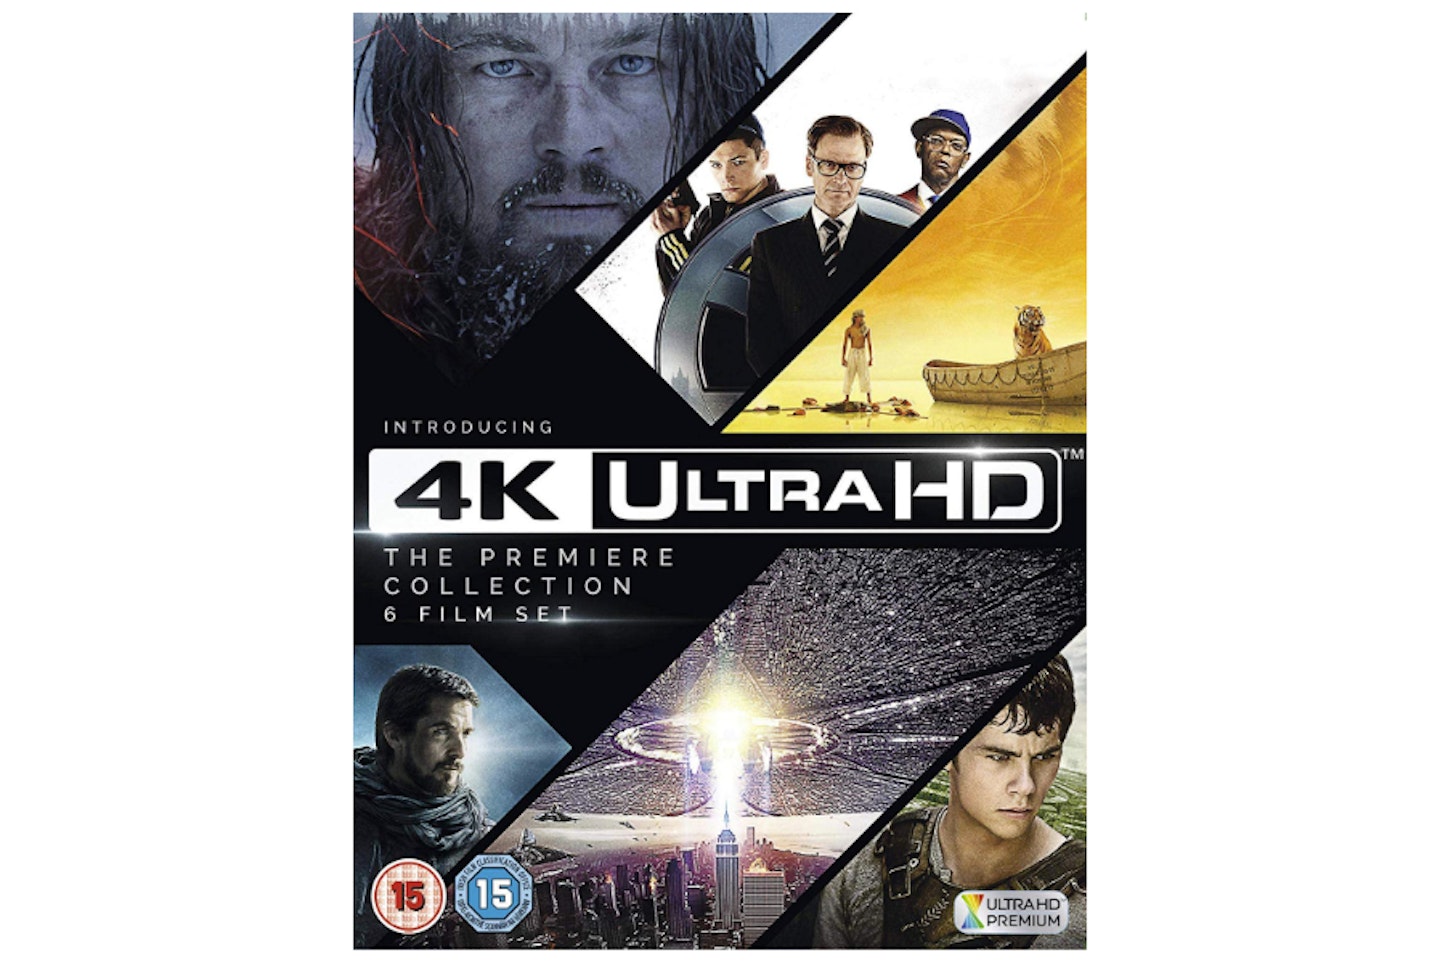 4K Ultra HD - The Premiere Collection, WAS £65 NOW £32